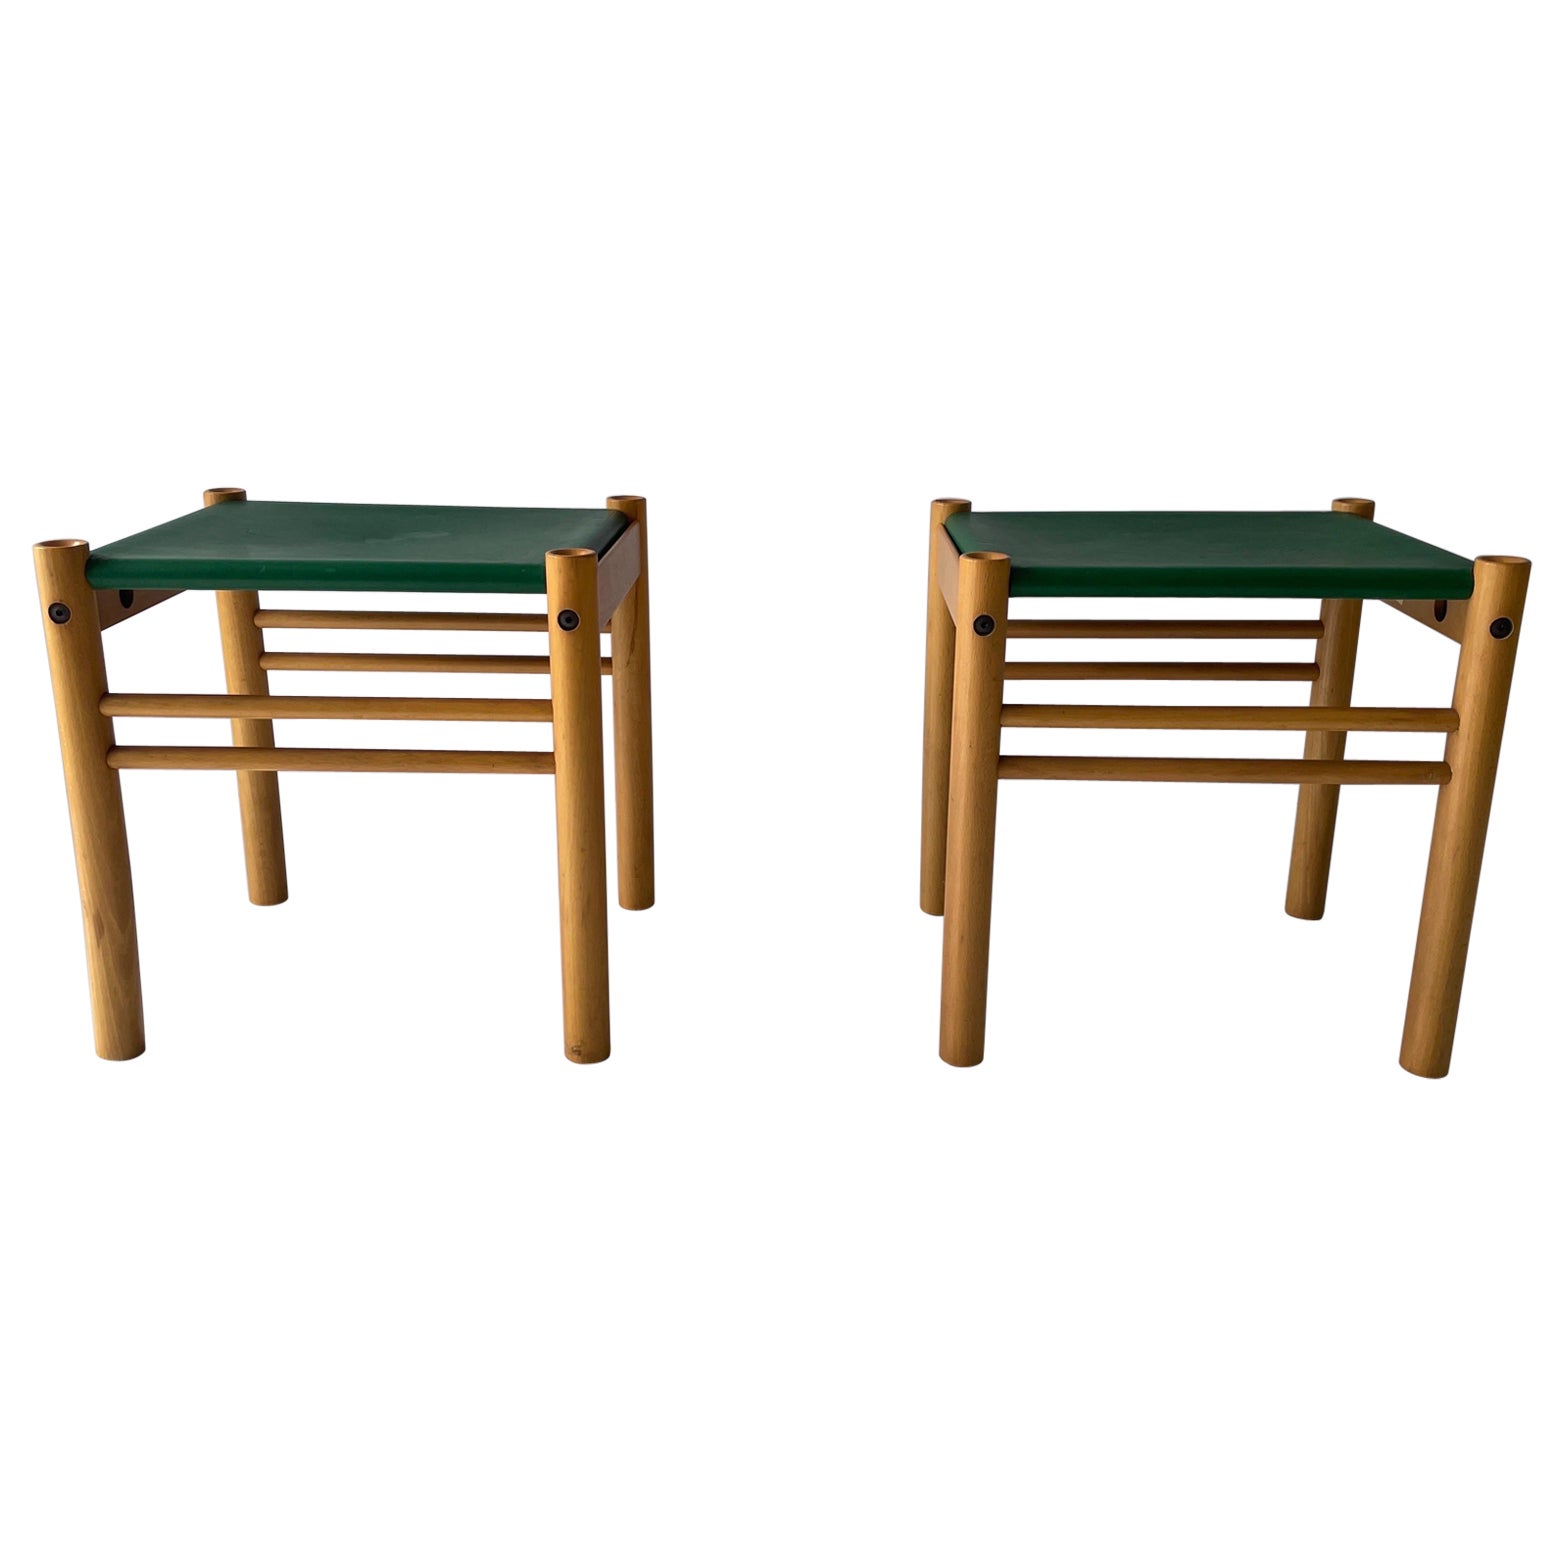 Green Leather and Birch Wood Pair of Stools by IBISCO, 1970s, Italy For Sale